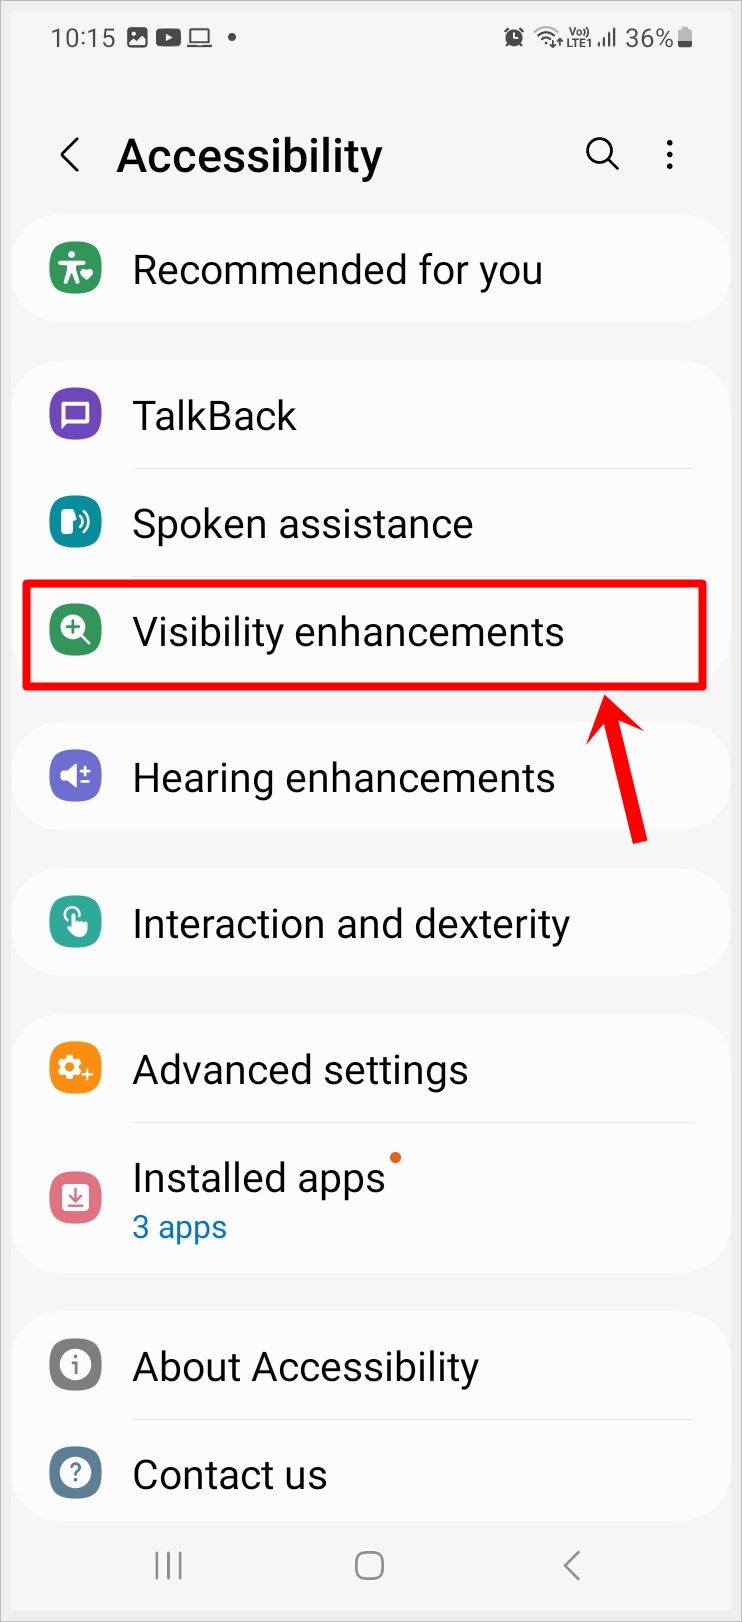 This image shows a screenshot of the 'Accessibility' page of a Samsung Galaxy phone. The 'Visibility Enhancements' option is highlighted.